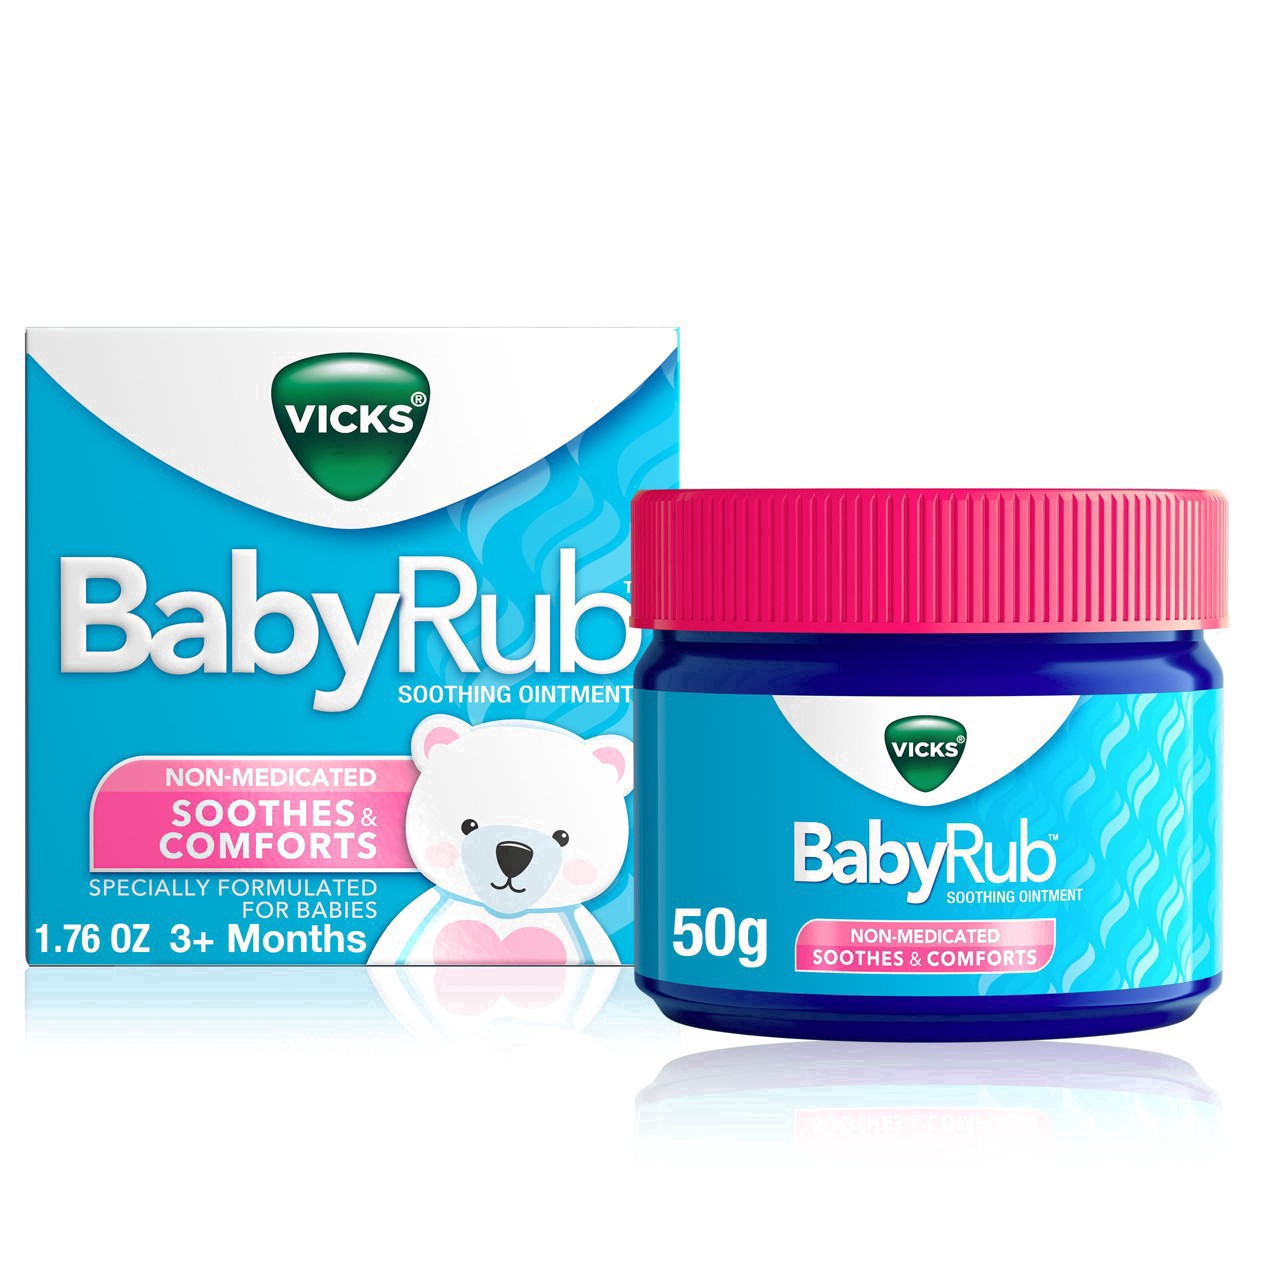 slide 17 of 78, Vicks BabyRub, Chest Rub Ointment with Soothing Aloe, Eucalyptus, Lavender, and Rosemary, from The Makers of VapoRub, 1.76 oz, 1.76 oz